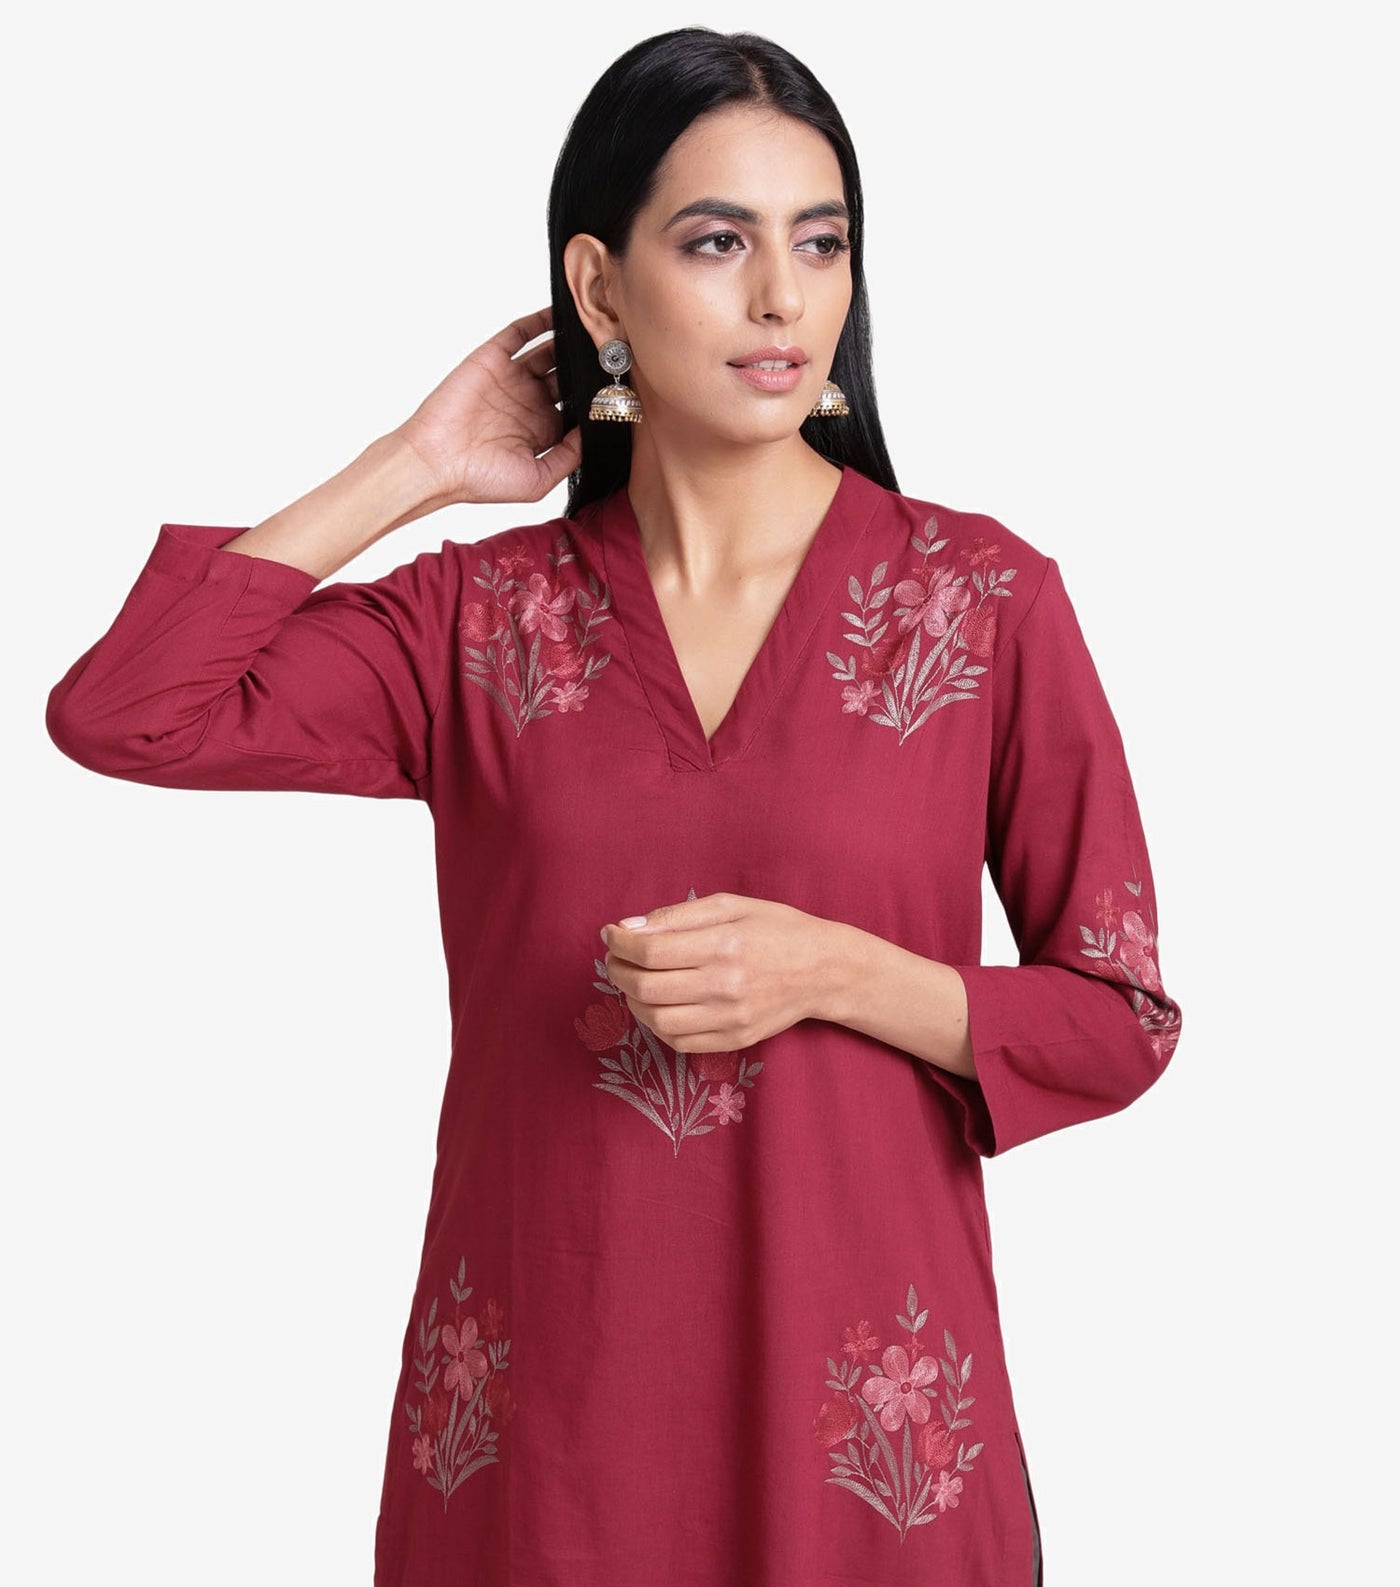 Ruby red embroidered cotton kurta & brown pants set